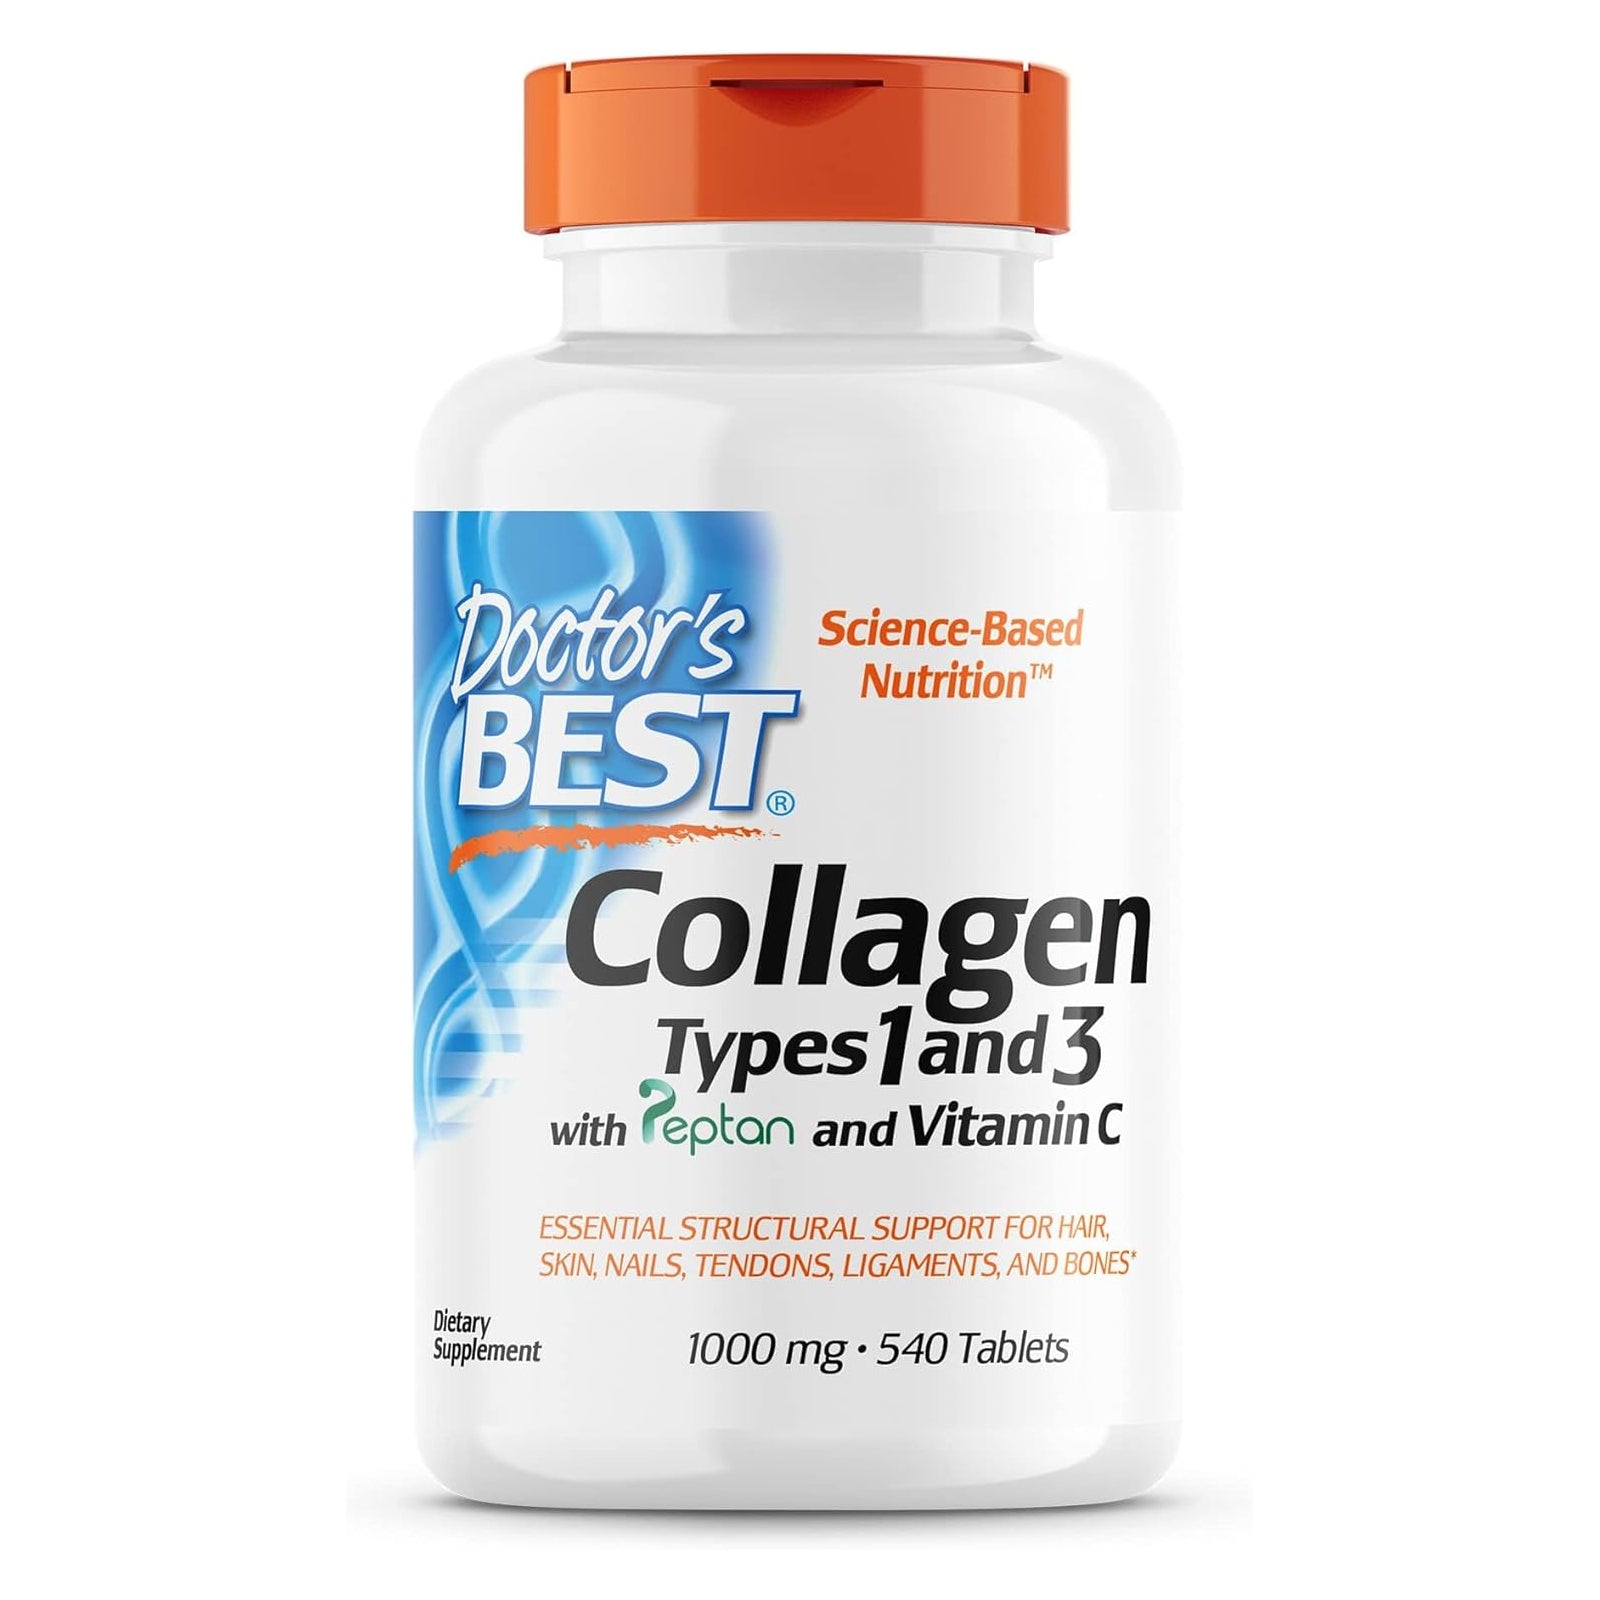 Doctor's Best Collagen Types 1 & 3 1000mg With Peptan & Vitamin C / 180 Tab